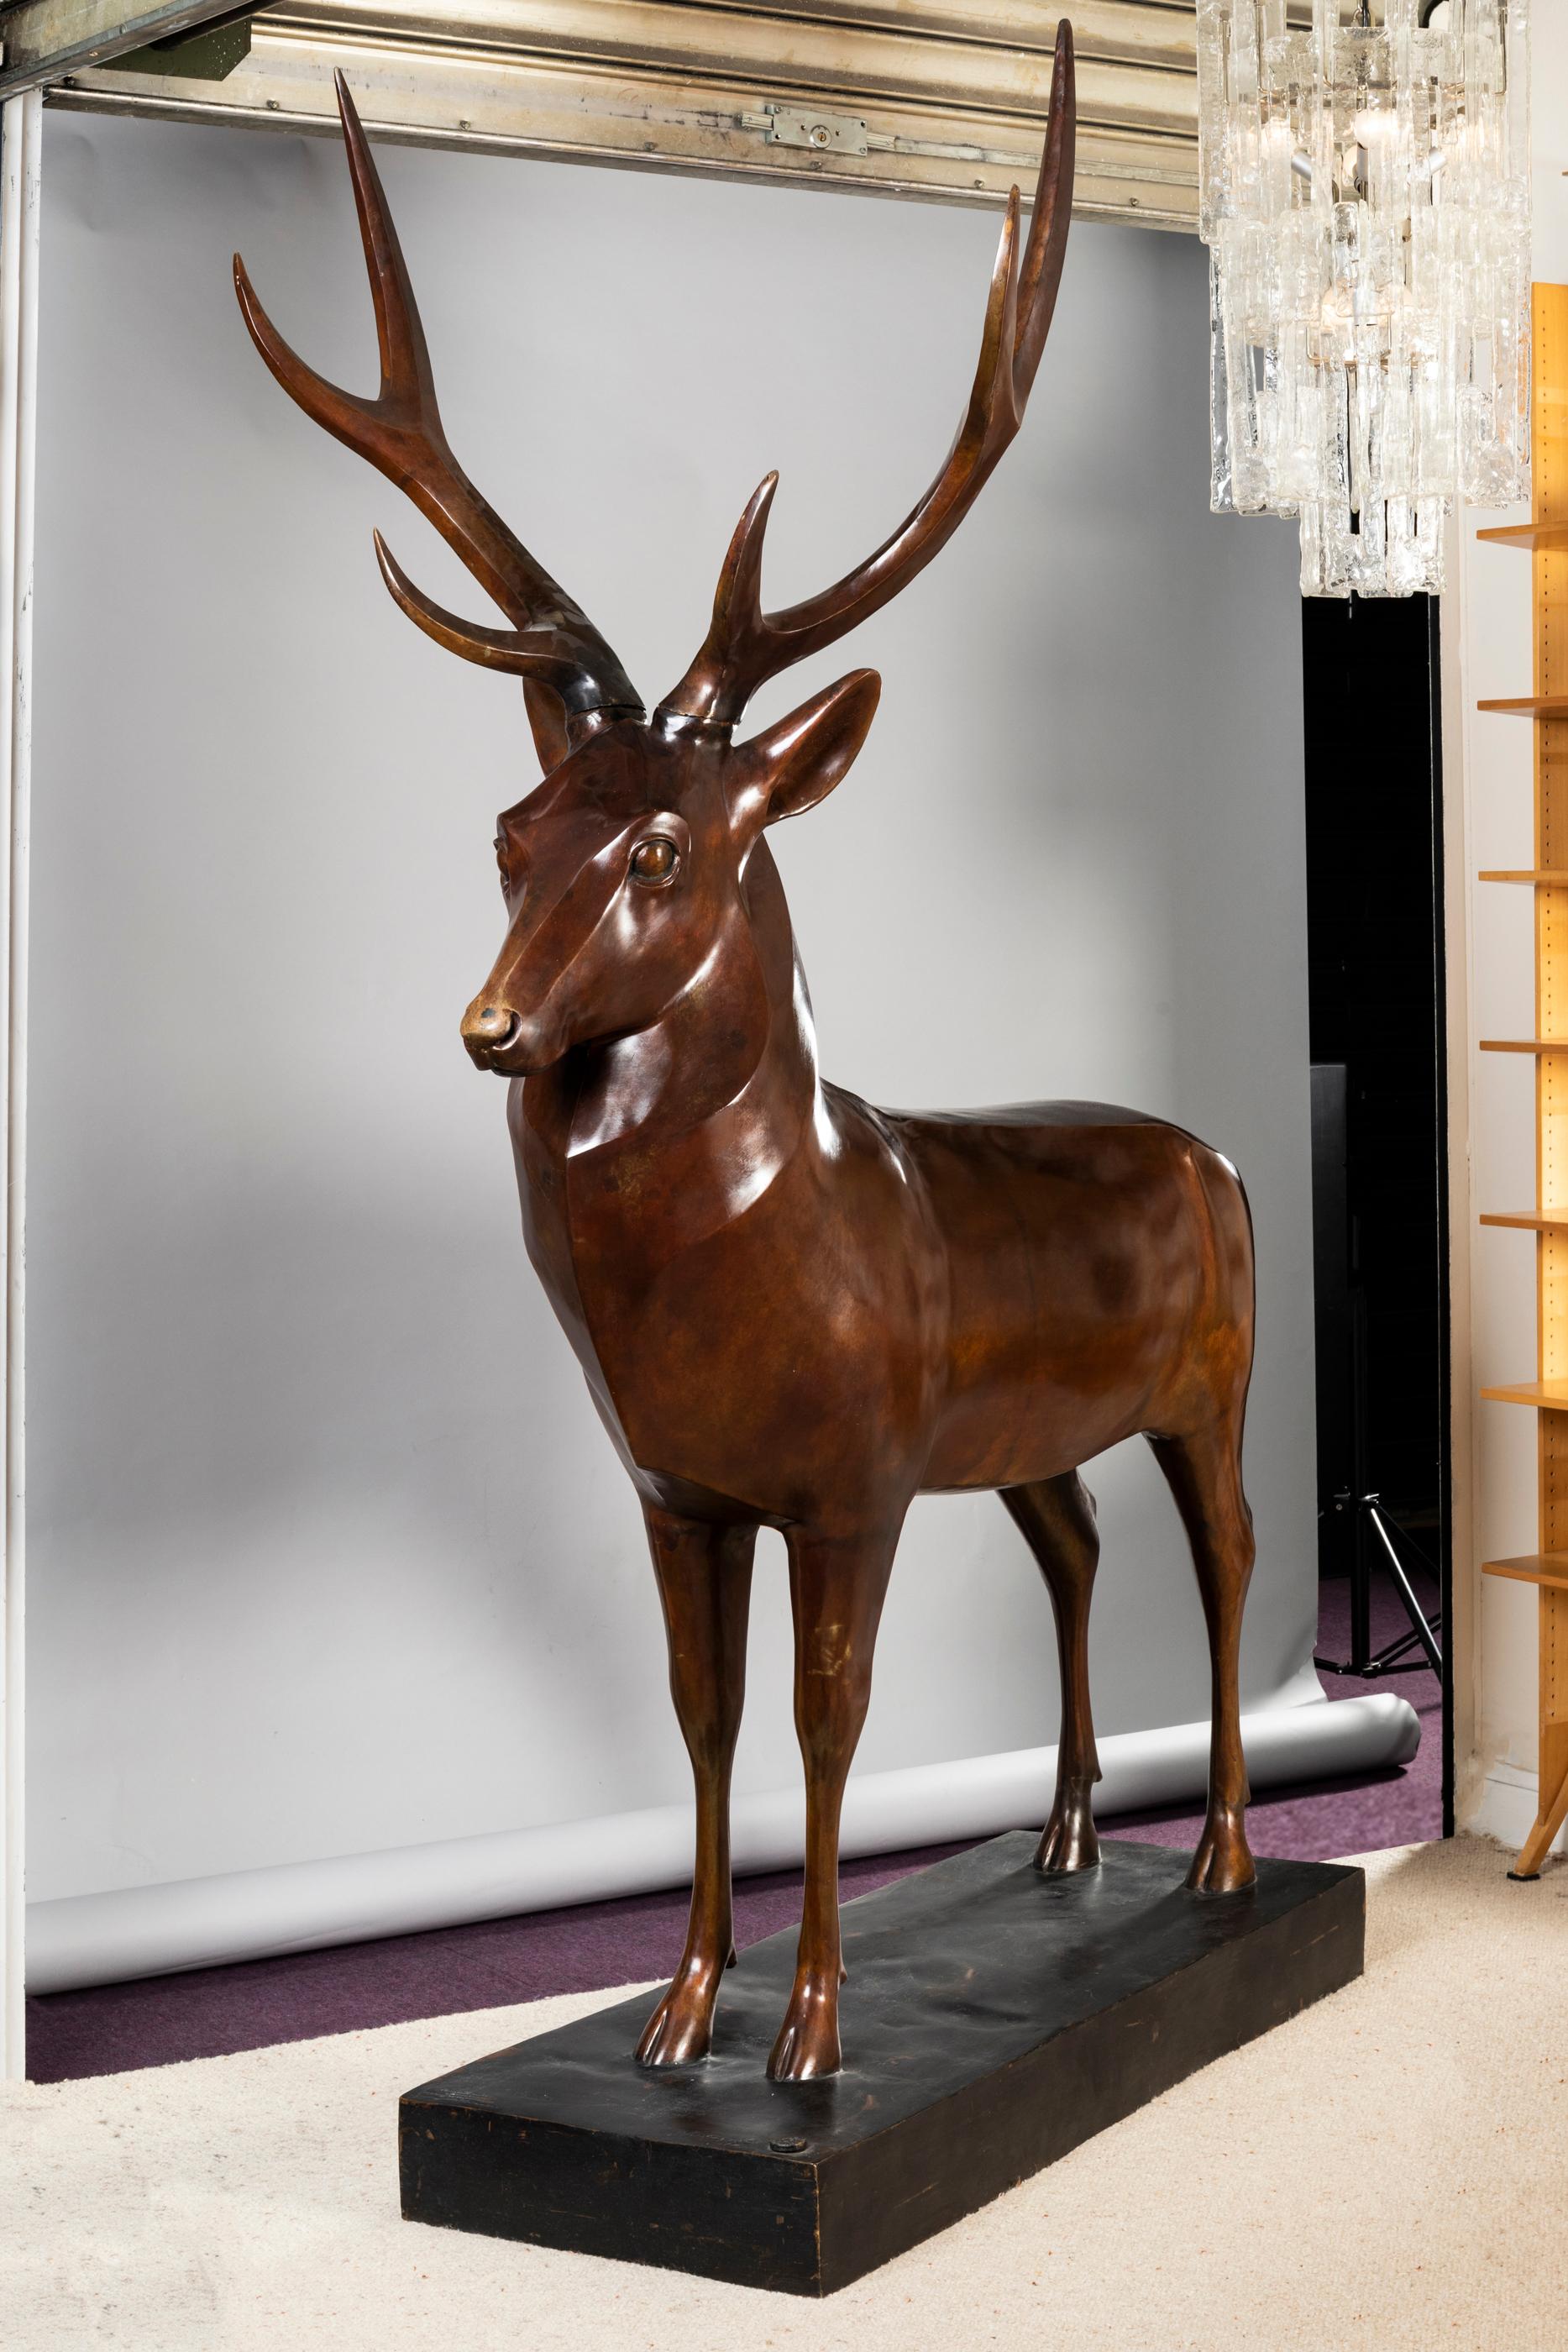 This elegant, noble deer in bronze has been created by French artist Christian Maas in 1991 in tribute to the Great Deer realized by Francois Pompon. (French sculptor: 1855-1933) in 1925. In 1991, Christian Maas start a series of tributes: Brancusi,